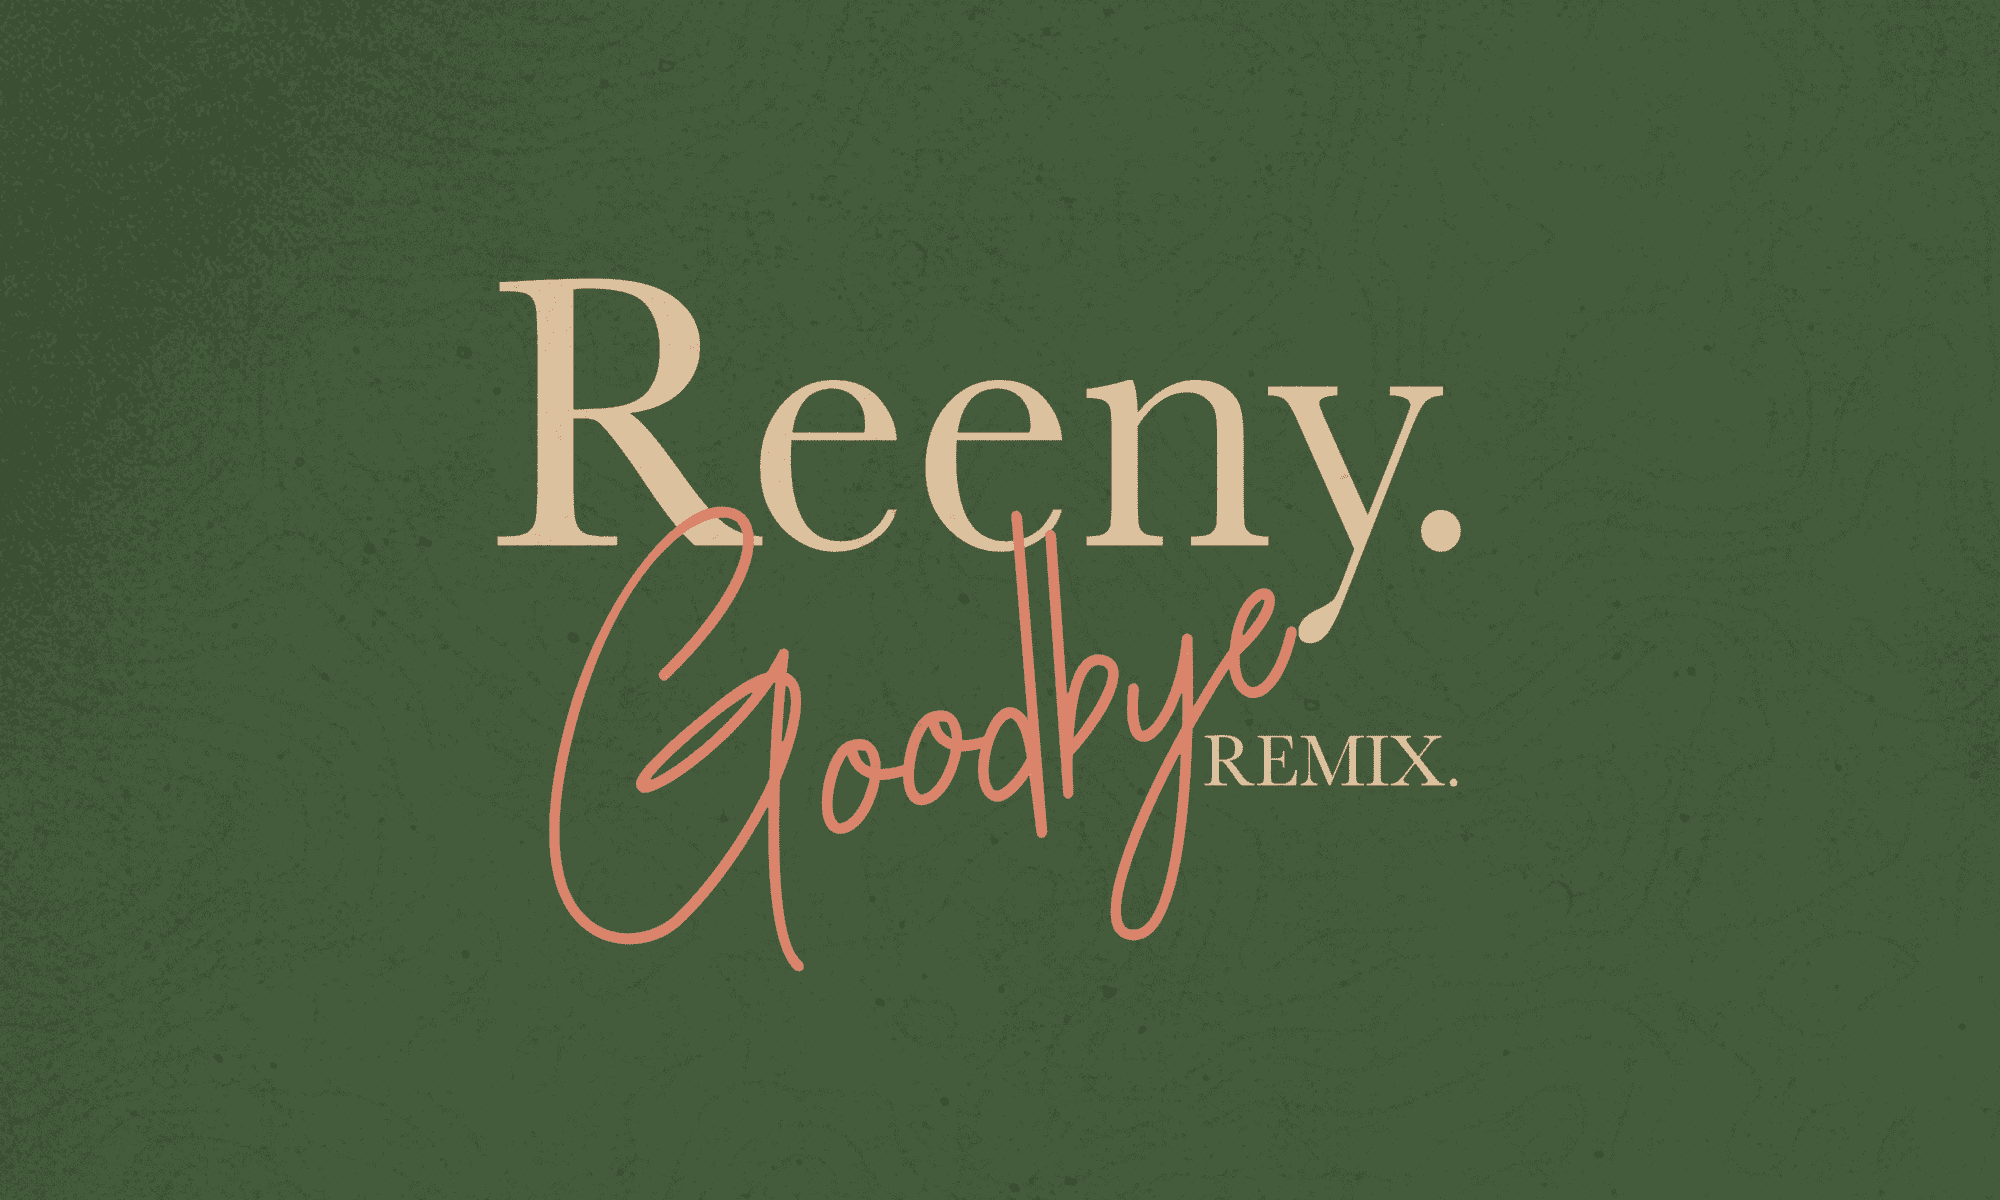 Goodbye remix by Reeny Smith single cover on an olive green background